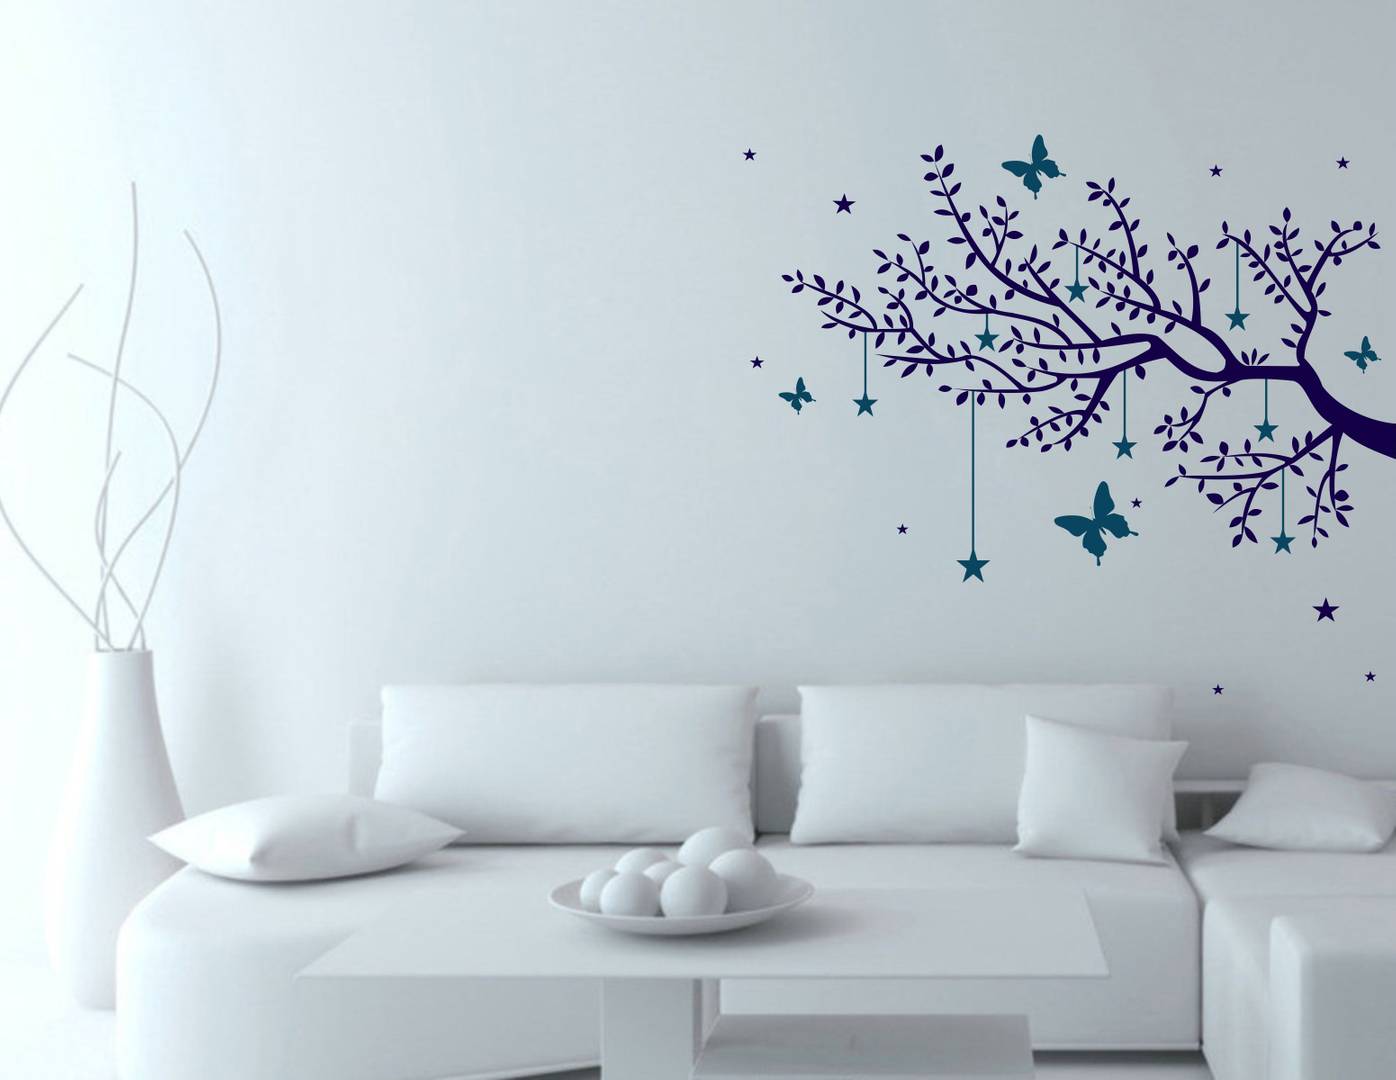 Wall Stickers | Wall Sticker For Living Room -Bedroom - Office - Home Hall Decor |Beautiful Tree 63 cmX 73 cm